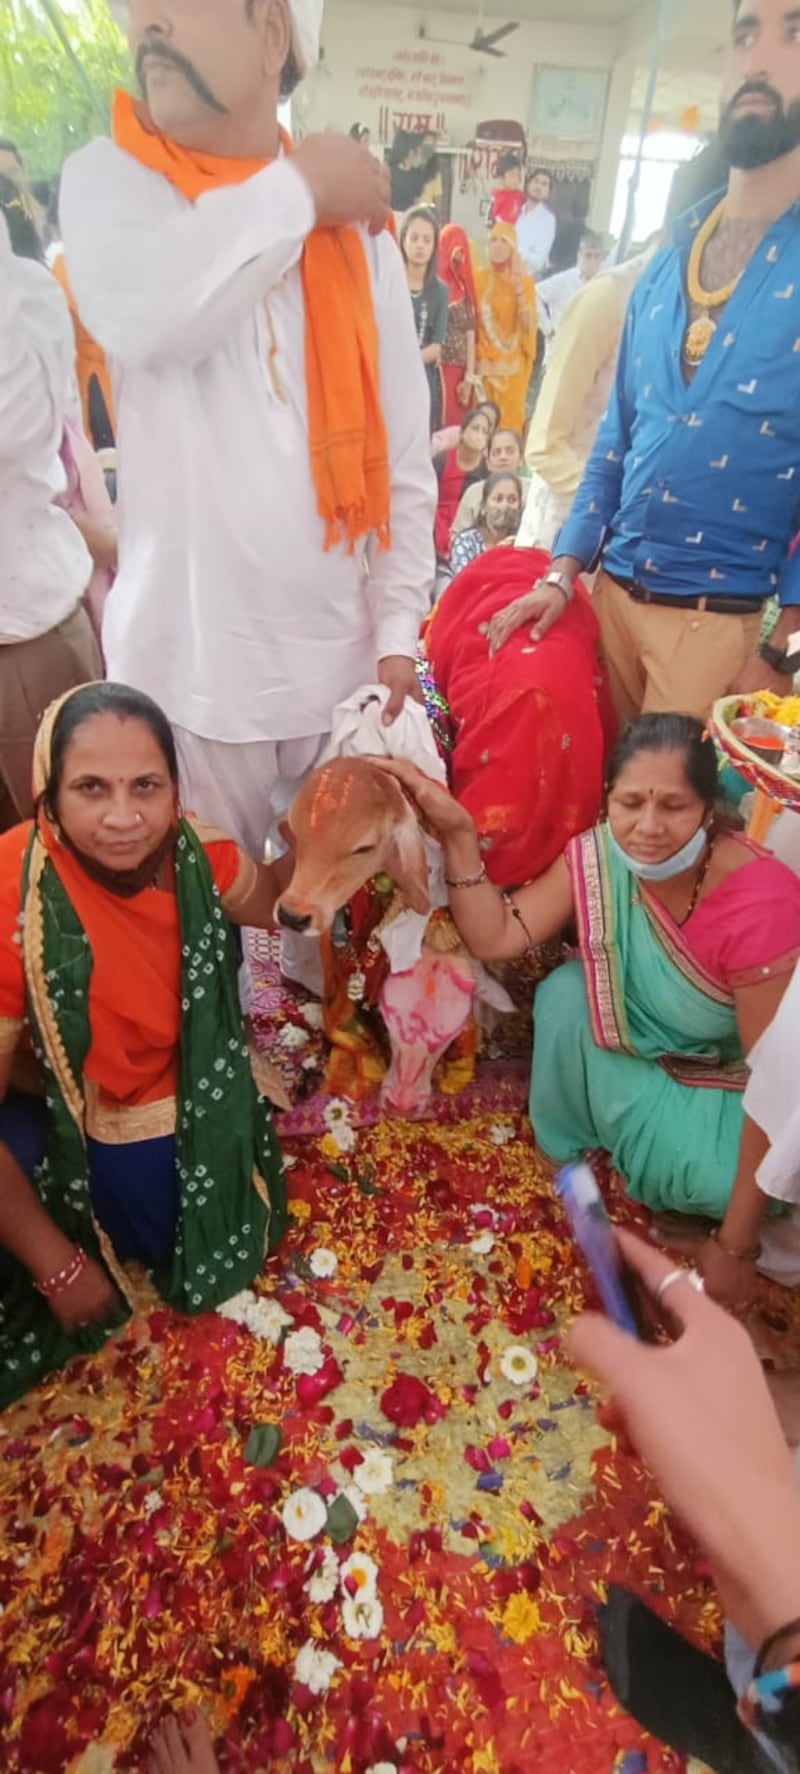 Many Hindus consider cows holy, and devotees dedicate themselves to the animals’ service